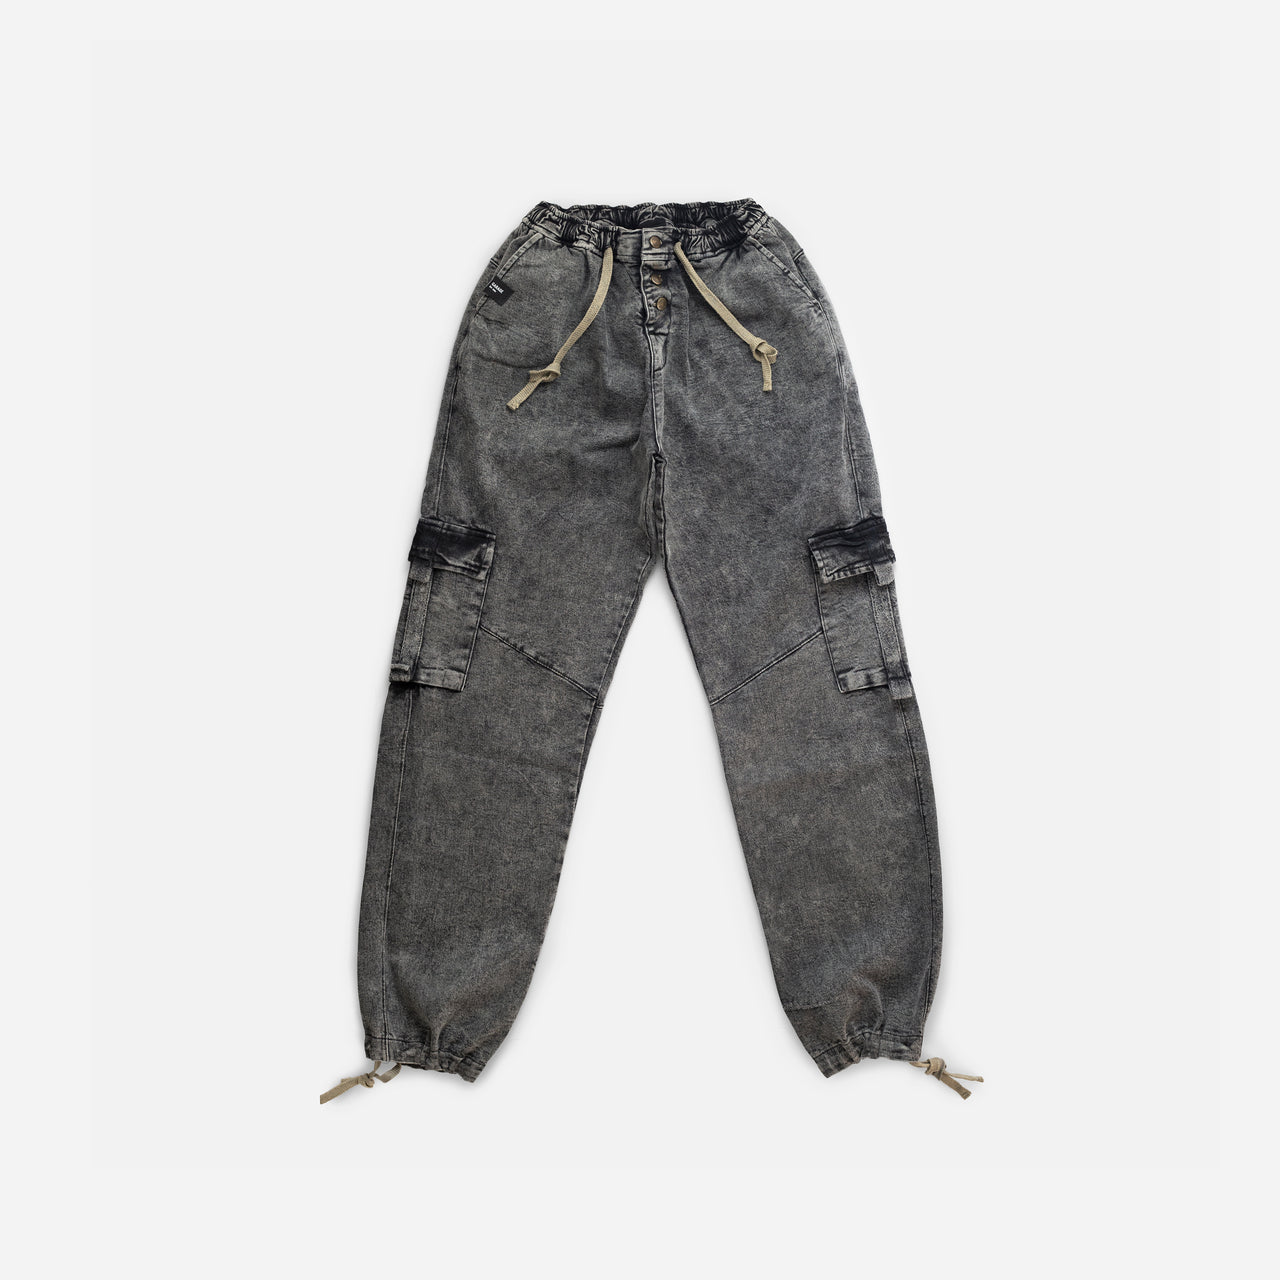 DIRTY CARGO JEANS . GRAY